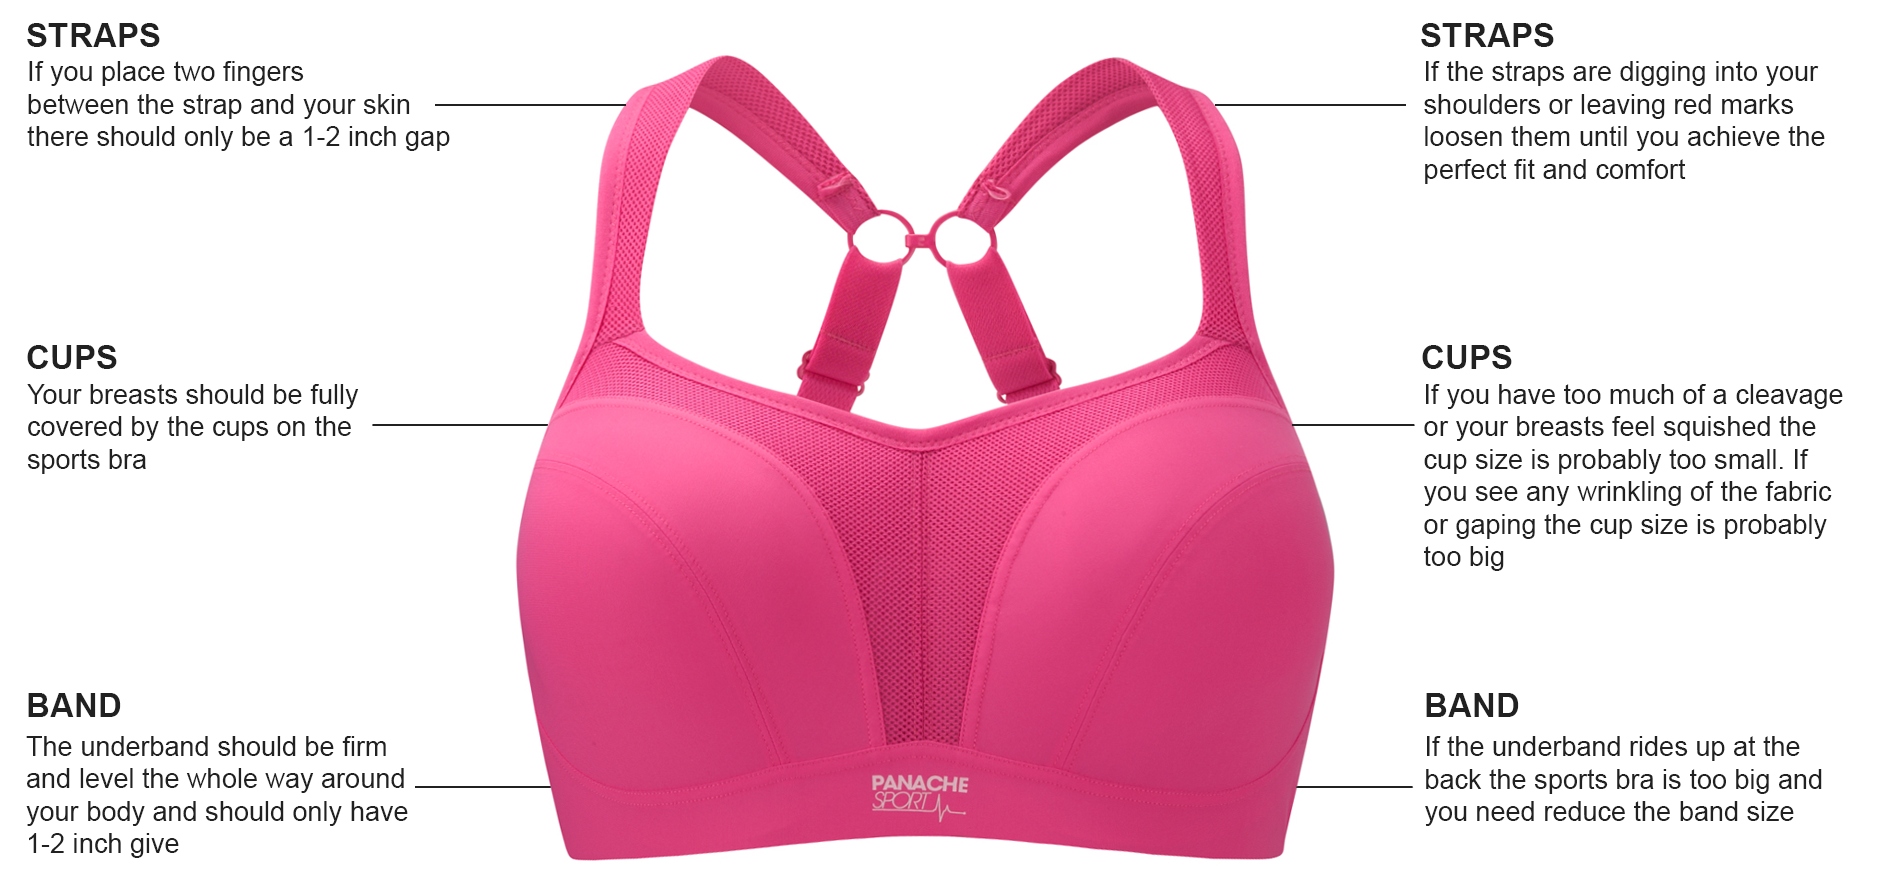 belle lingerie sports bra buying guide fitting advice